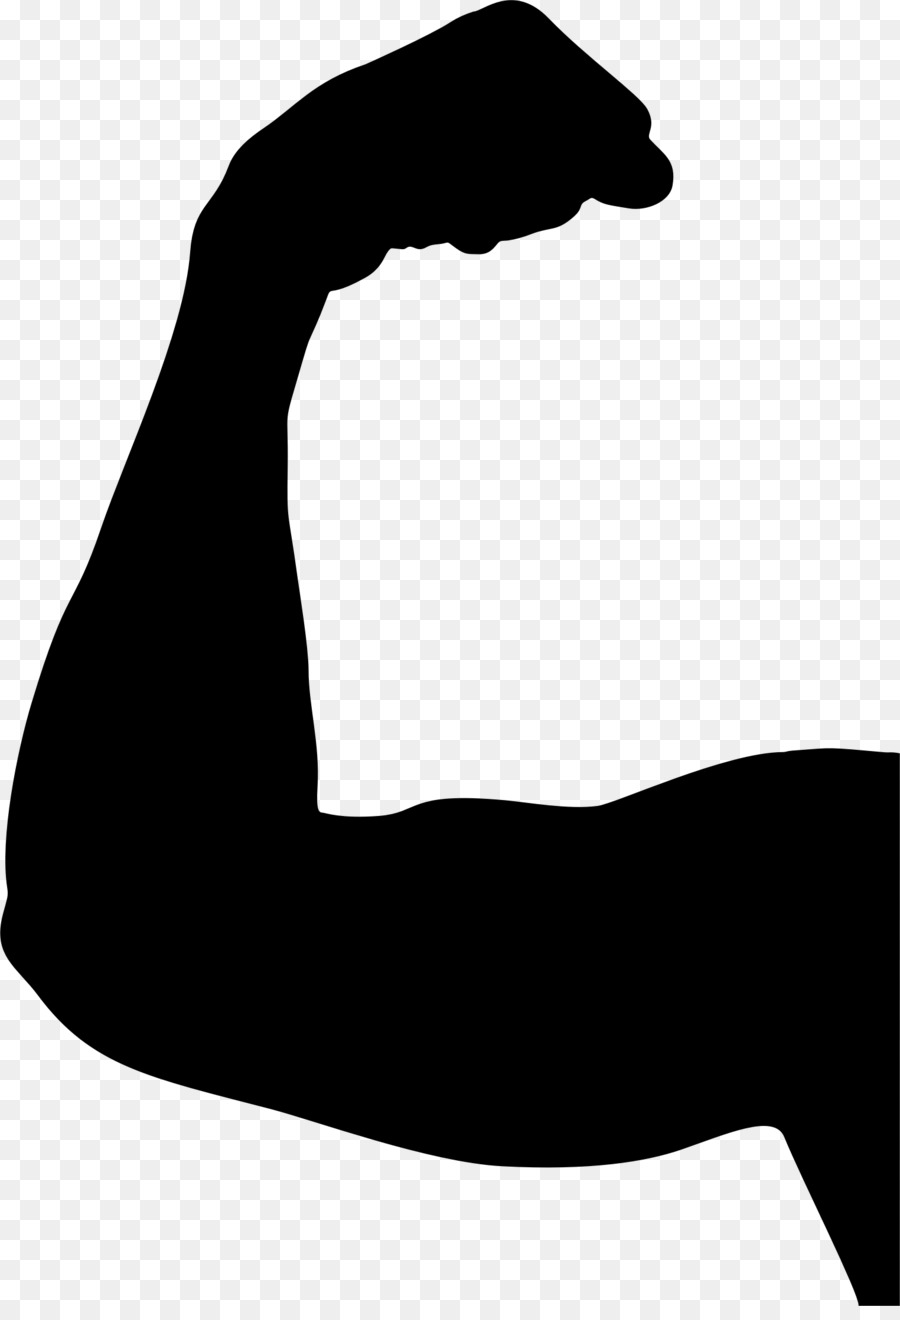 Biceps Finger Silhouette Clip art Drawing - black silhouette lamb png image png download - 1524*2212 - Free Transparent Biceps png Download.